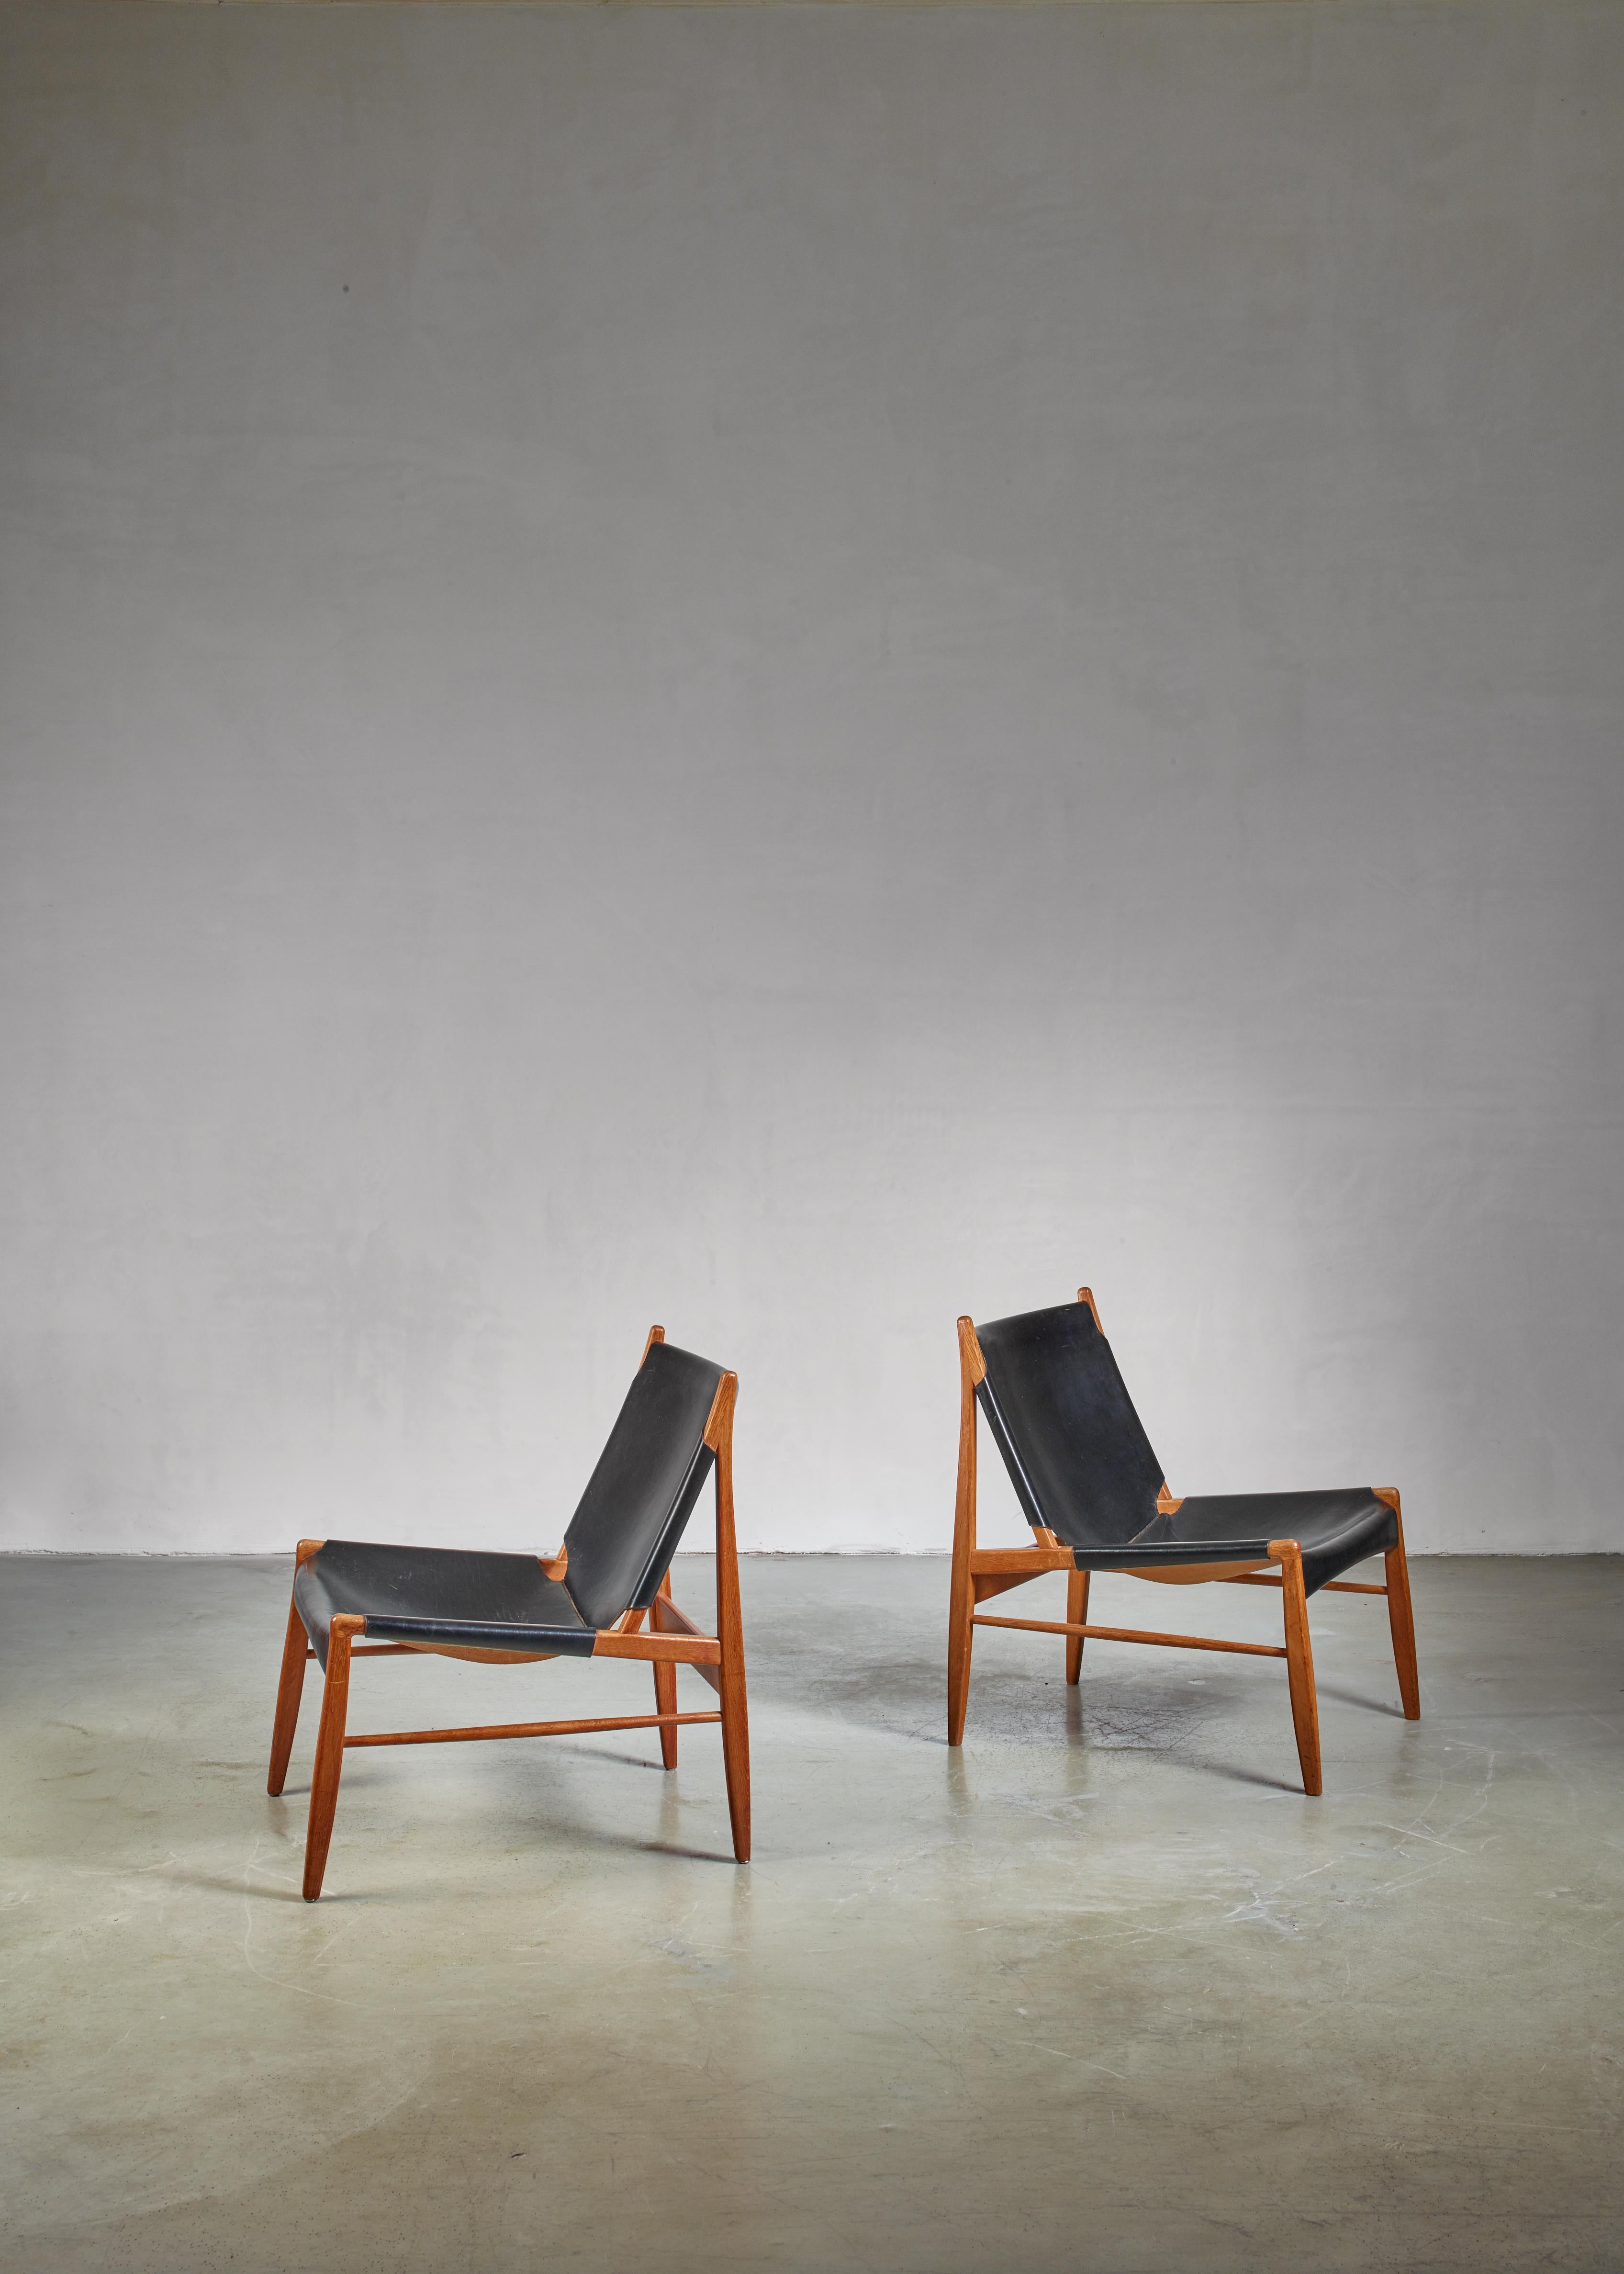 A pair of 'Hunting' lounge chairs by Franz Xaver Lutz for WK Möbel. These Hunting or Chimney chairs slope slightly backwards for a relaxing posture and as their name indicates, they are often positioned close to the fire place. 
The price is per